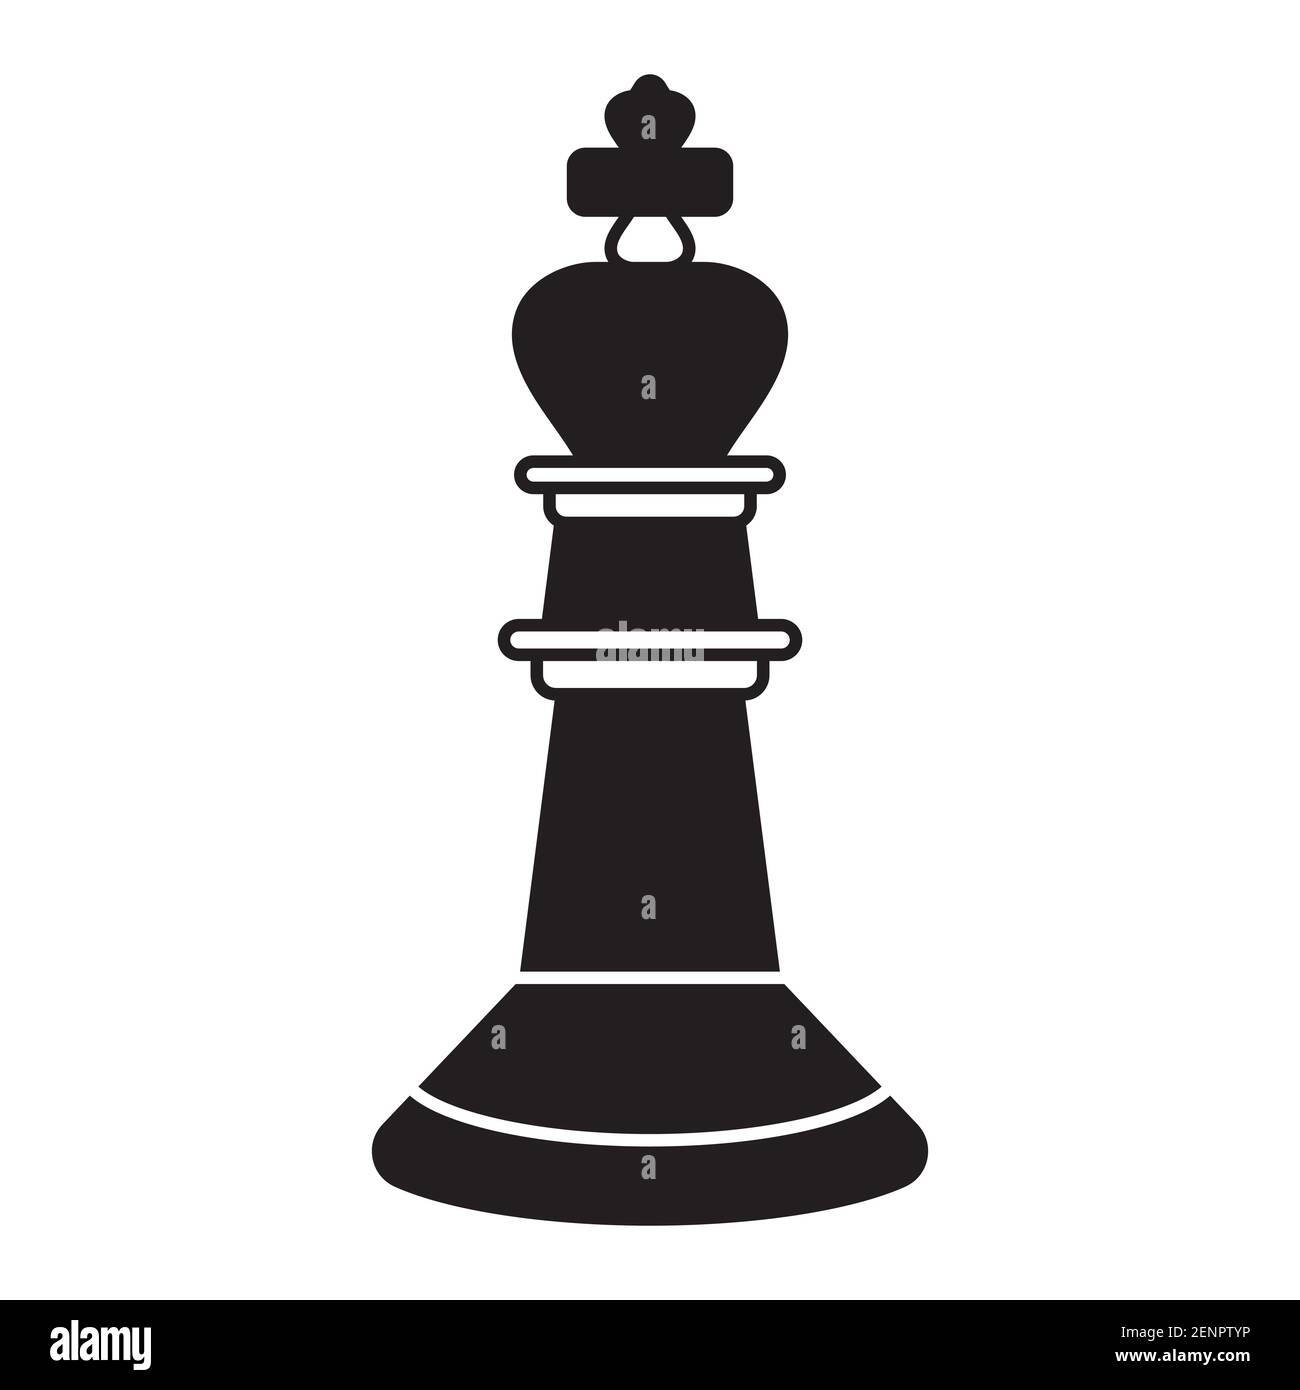 King chess piece flat vector icon for apps or website Stock Vector